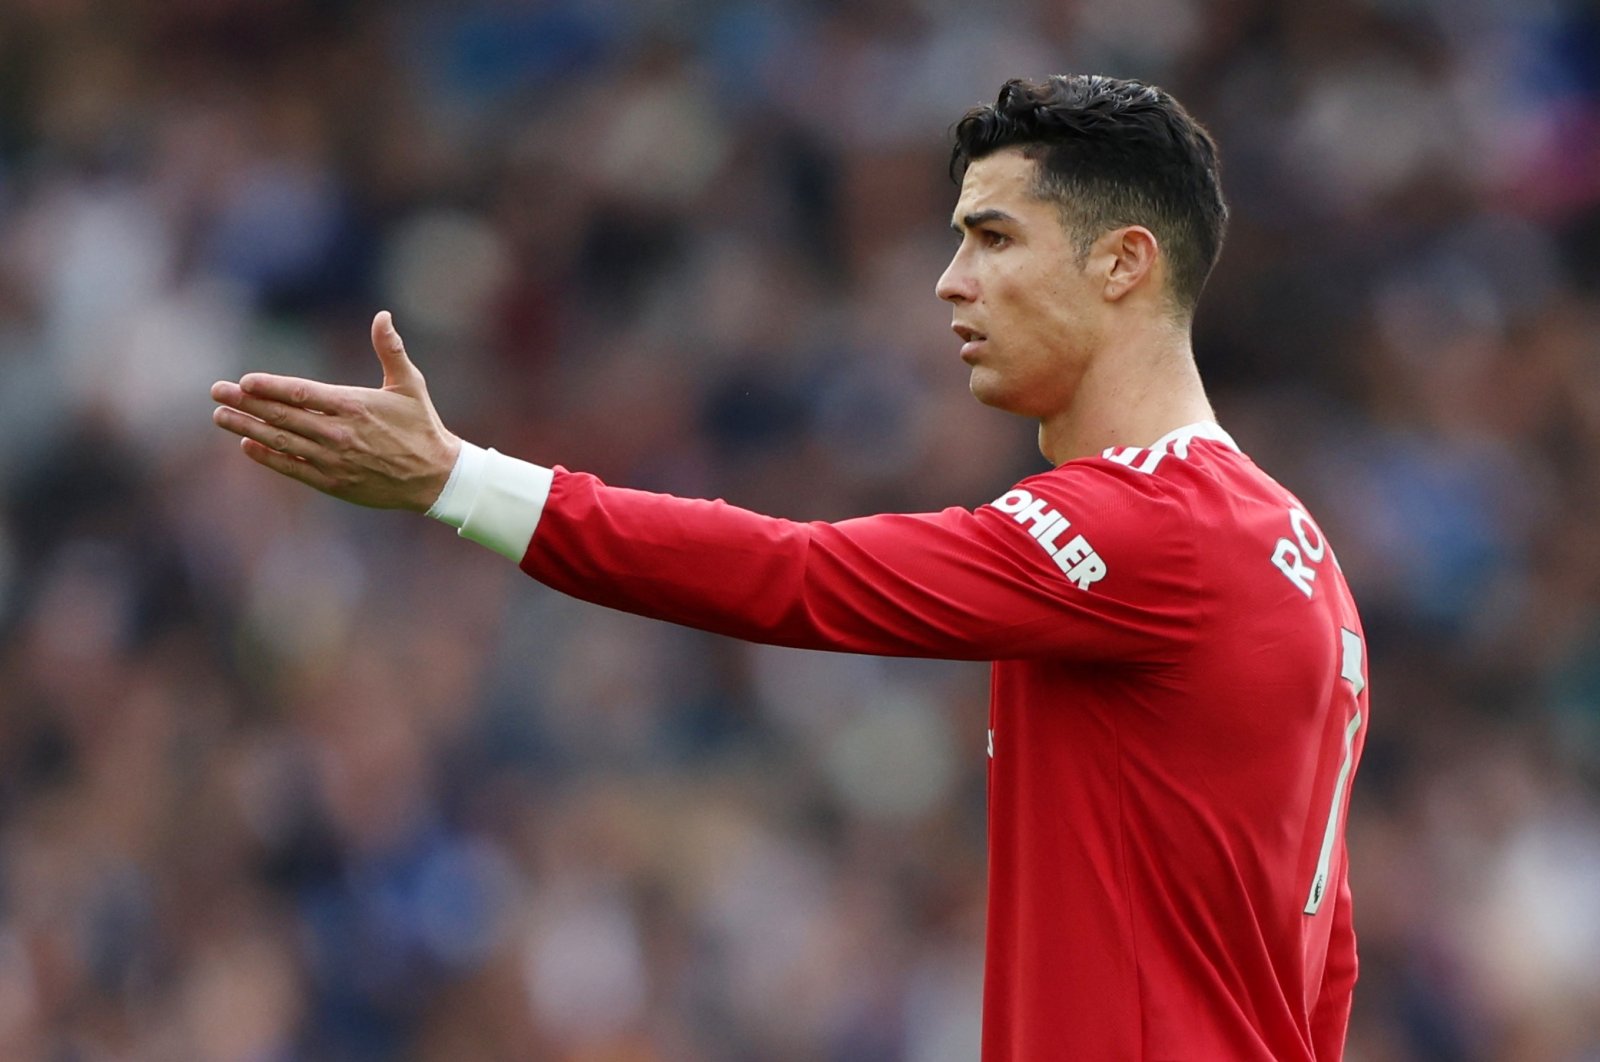 Man Utd&#039;s Cristiano Ronaldo reacts during a Premier League match against Brighton &amp; Hove Albion, Brighton, England, May 7, 2022. (Reuters Photo)